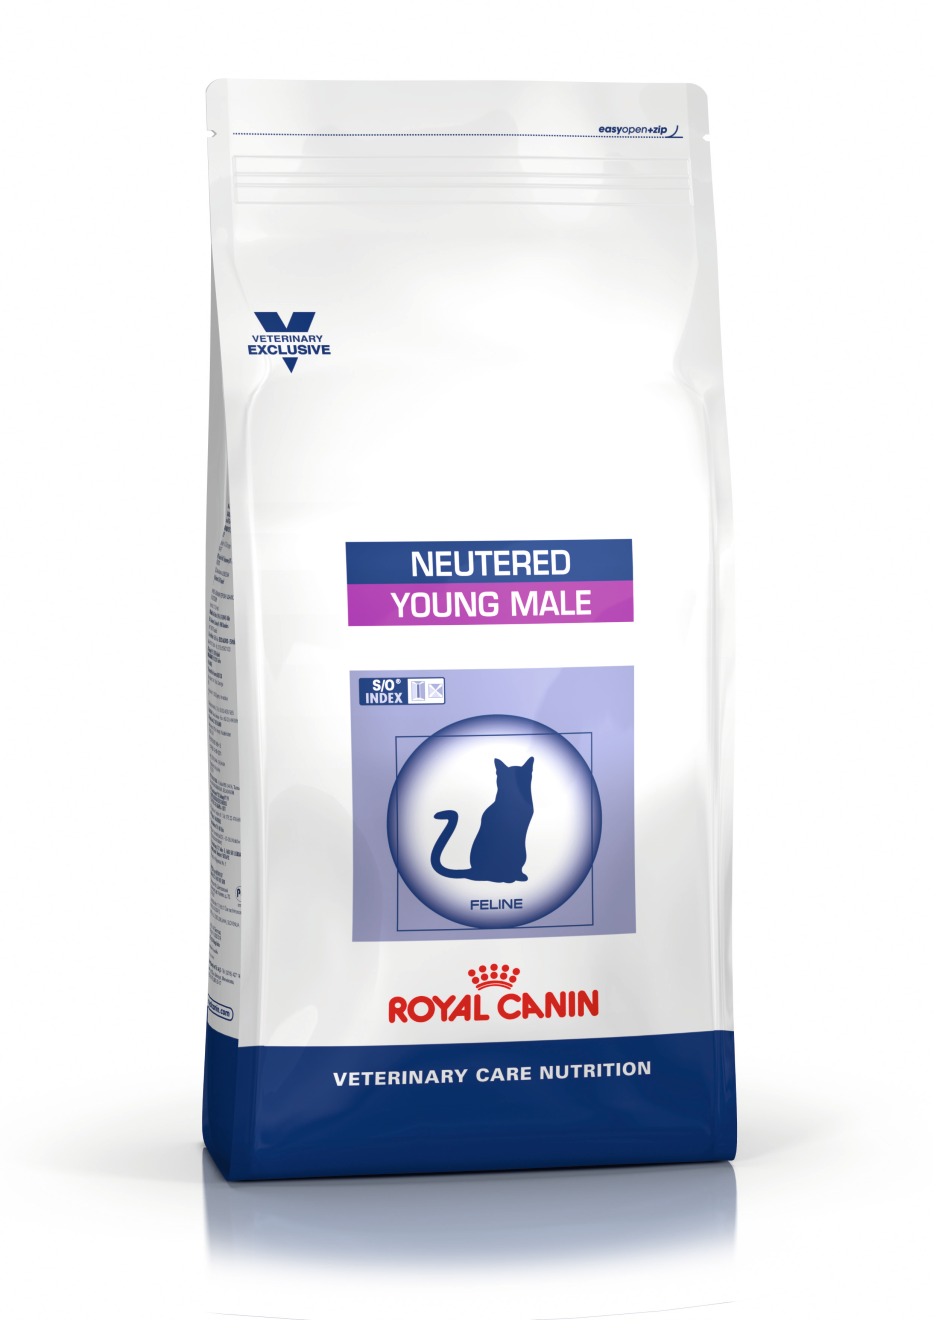 royal canin neutered male cat food 10kg